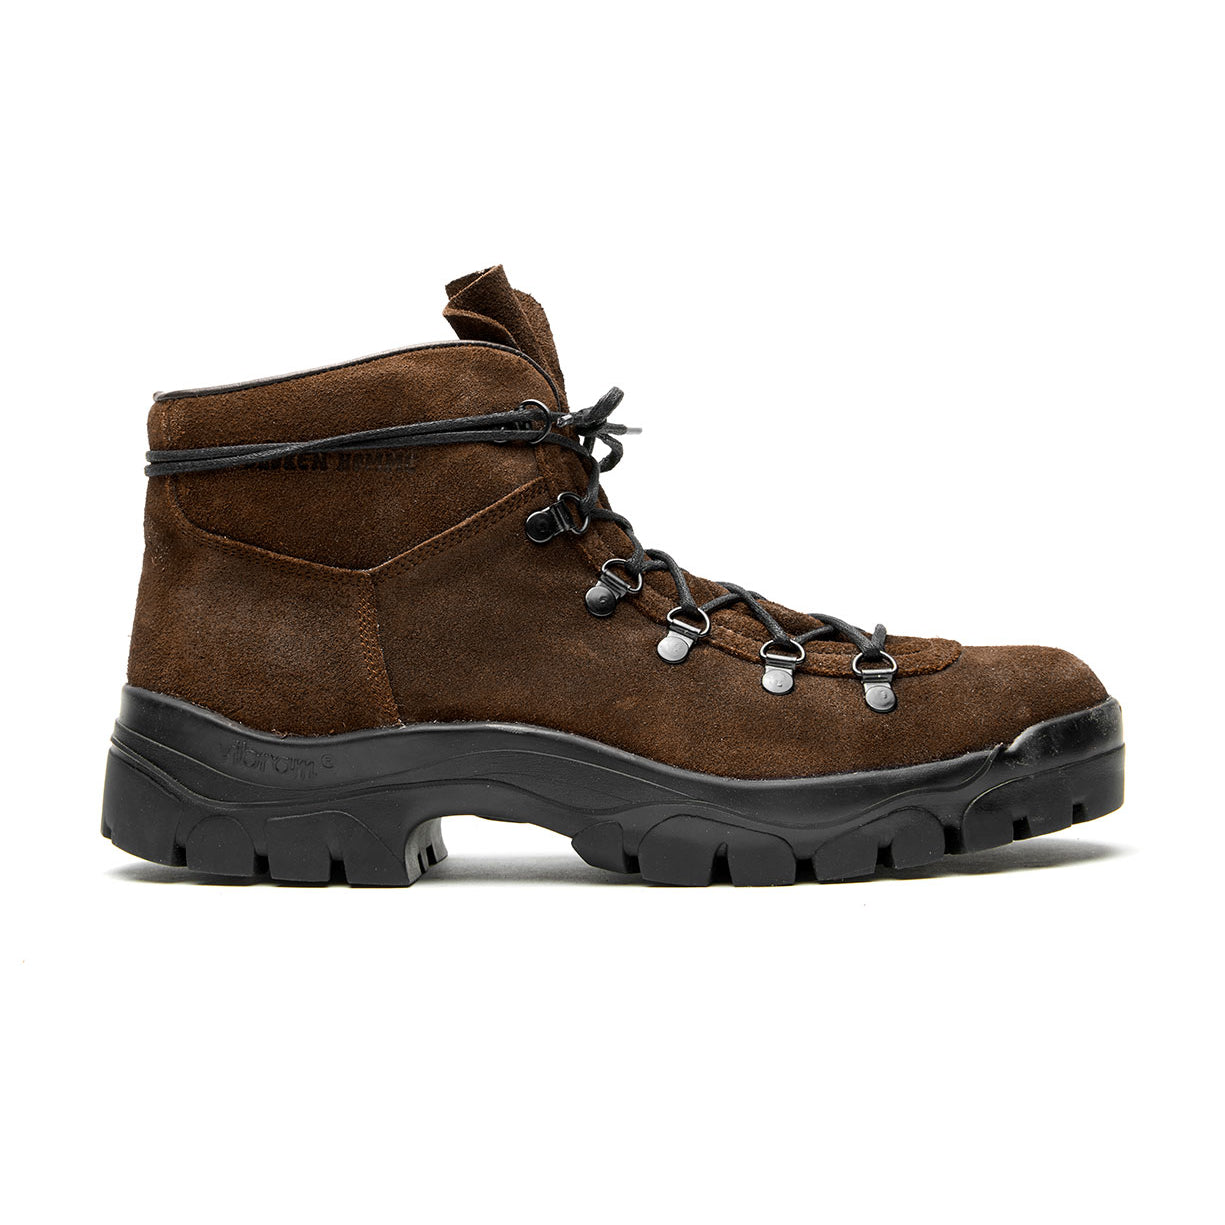 A Broken Homme Weber boot in a brown hiking silhouette on a white background.